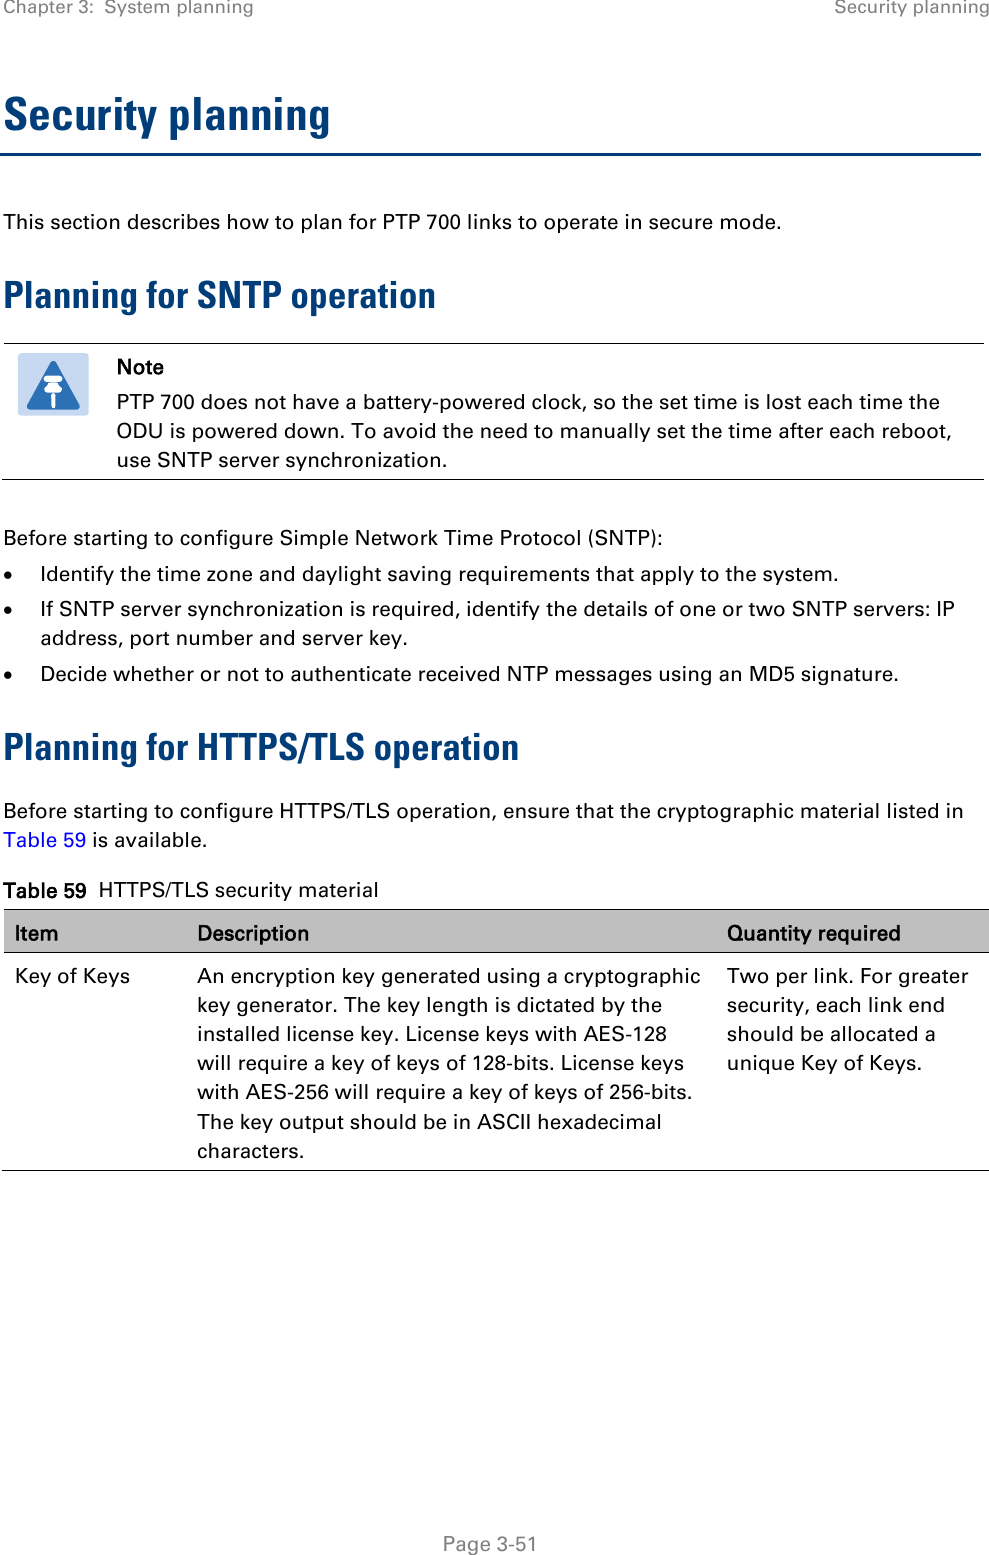 Chapter 3:  System planning Security planning  Security planning This section describes how to plan for PTP 700 links to operate in secure mode. Planning for SNTP operation  Note PTP 700 does not have a battery-powered clock, so the set time is lost each time the ODU is powered down. To avoid the need to manually set the time after each reboot, use SNTP server synchronization.  Before starting to configure Simple Network Time Protocol (SNTP): • Identify the time zone and daylight saving requirements that apply to the system. • If SNTP server synchronization is required, identify the details of one or two SNTP servers: IP address, port number and server key. • Decide whether or not to authenticate received NTP messages using an MD5 signature. Planning for HTTPS/TLS operation Before starting to configure HTTPS/TLS operation, ensure that the cryptographic material listed in Table 59 is available. Table 59  HTTPS/TLS security material Item Description Quantity required Key of Keys An encryption key generated using a cryptographic key generator. The key length is dictated by the installed license key. License keys with AES-128 will require a key of keys of 128-bits. License keys with AES-256 will require a key of keys of 256-bits. The key output should be in ASCII hexadecimal characters. Two per link. For greater security, each link end should be allocated a unique Key of Keys.  Page 3-51 